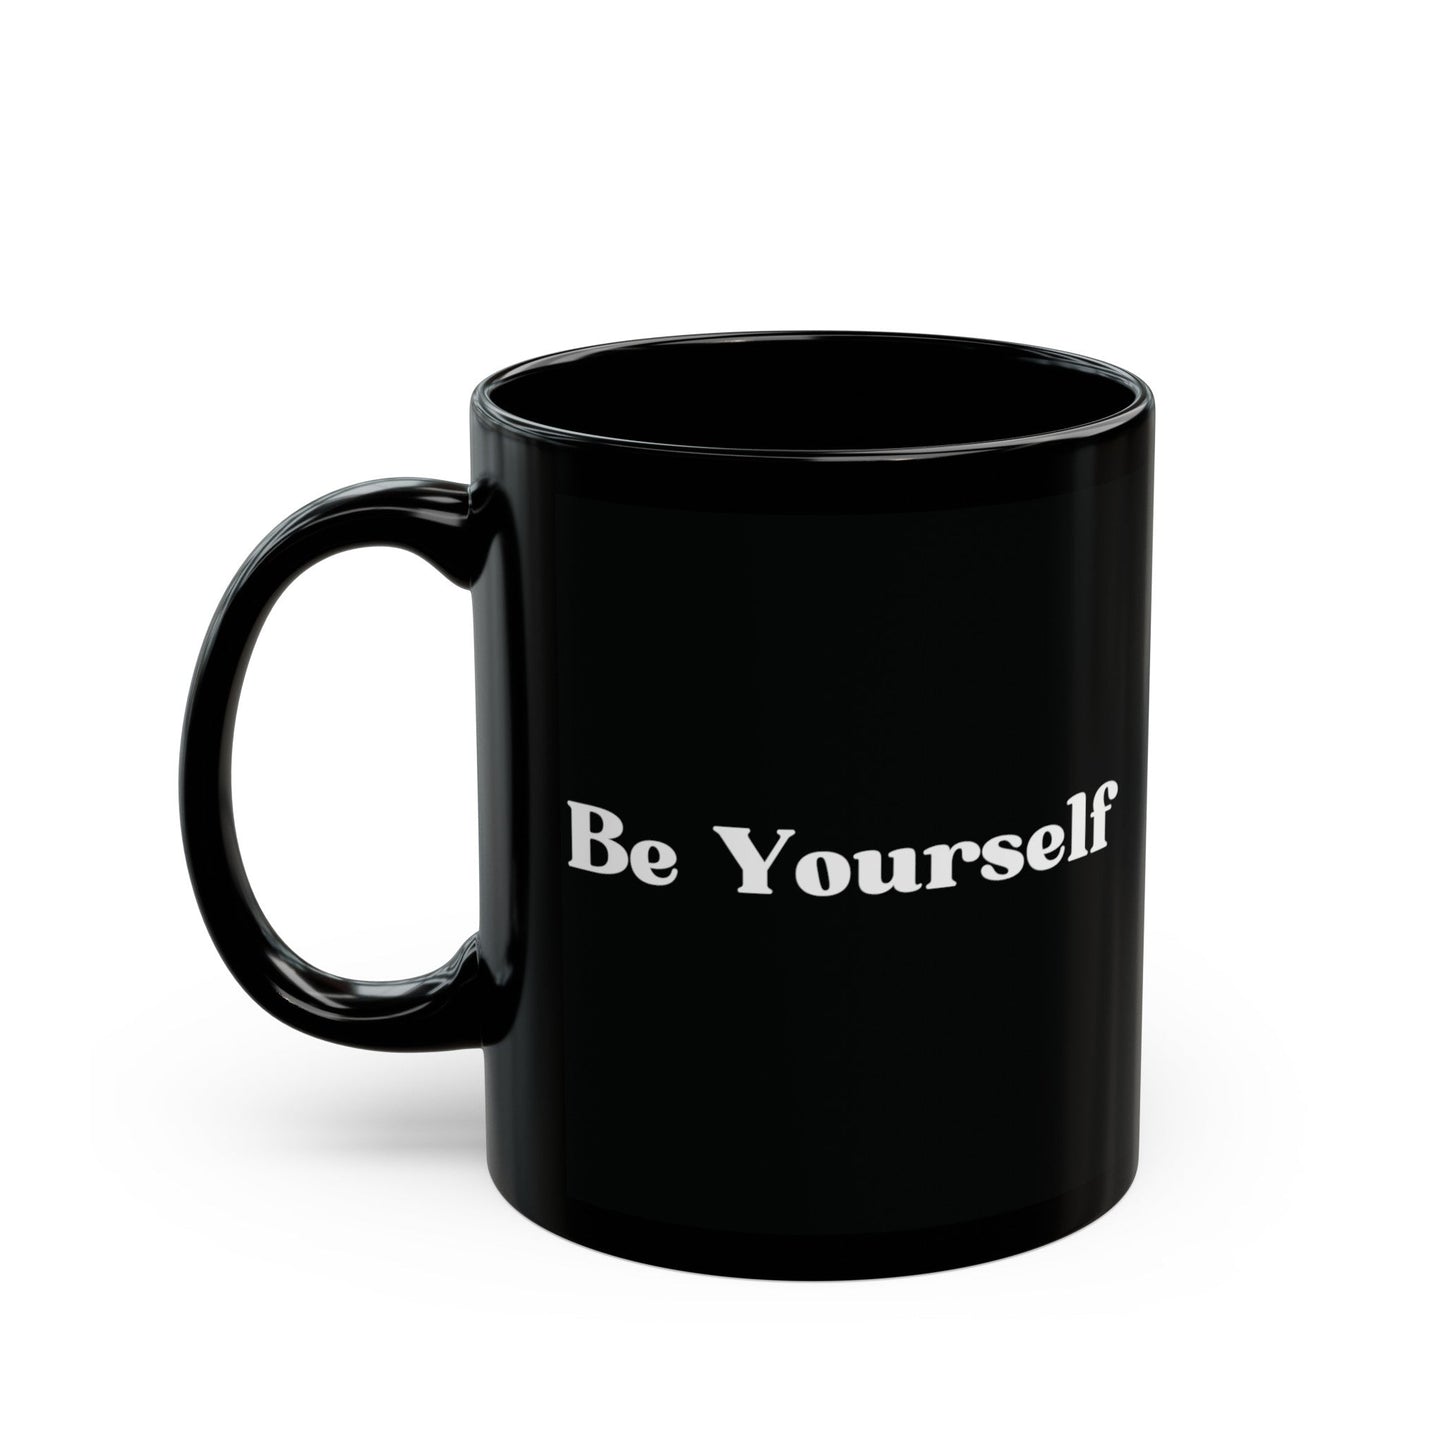 Be Yourself | Inspirational Cup, Video Game Coffee Cup, Office Or Geek Gift | Black Coffee Mug (11/15oz) - Moikas